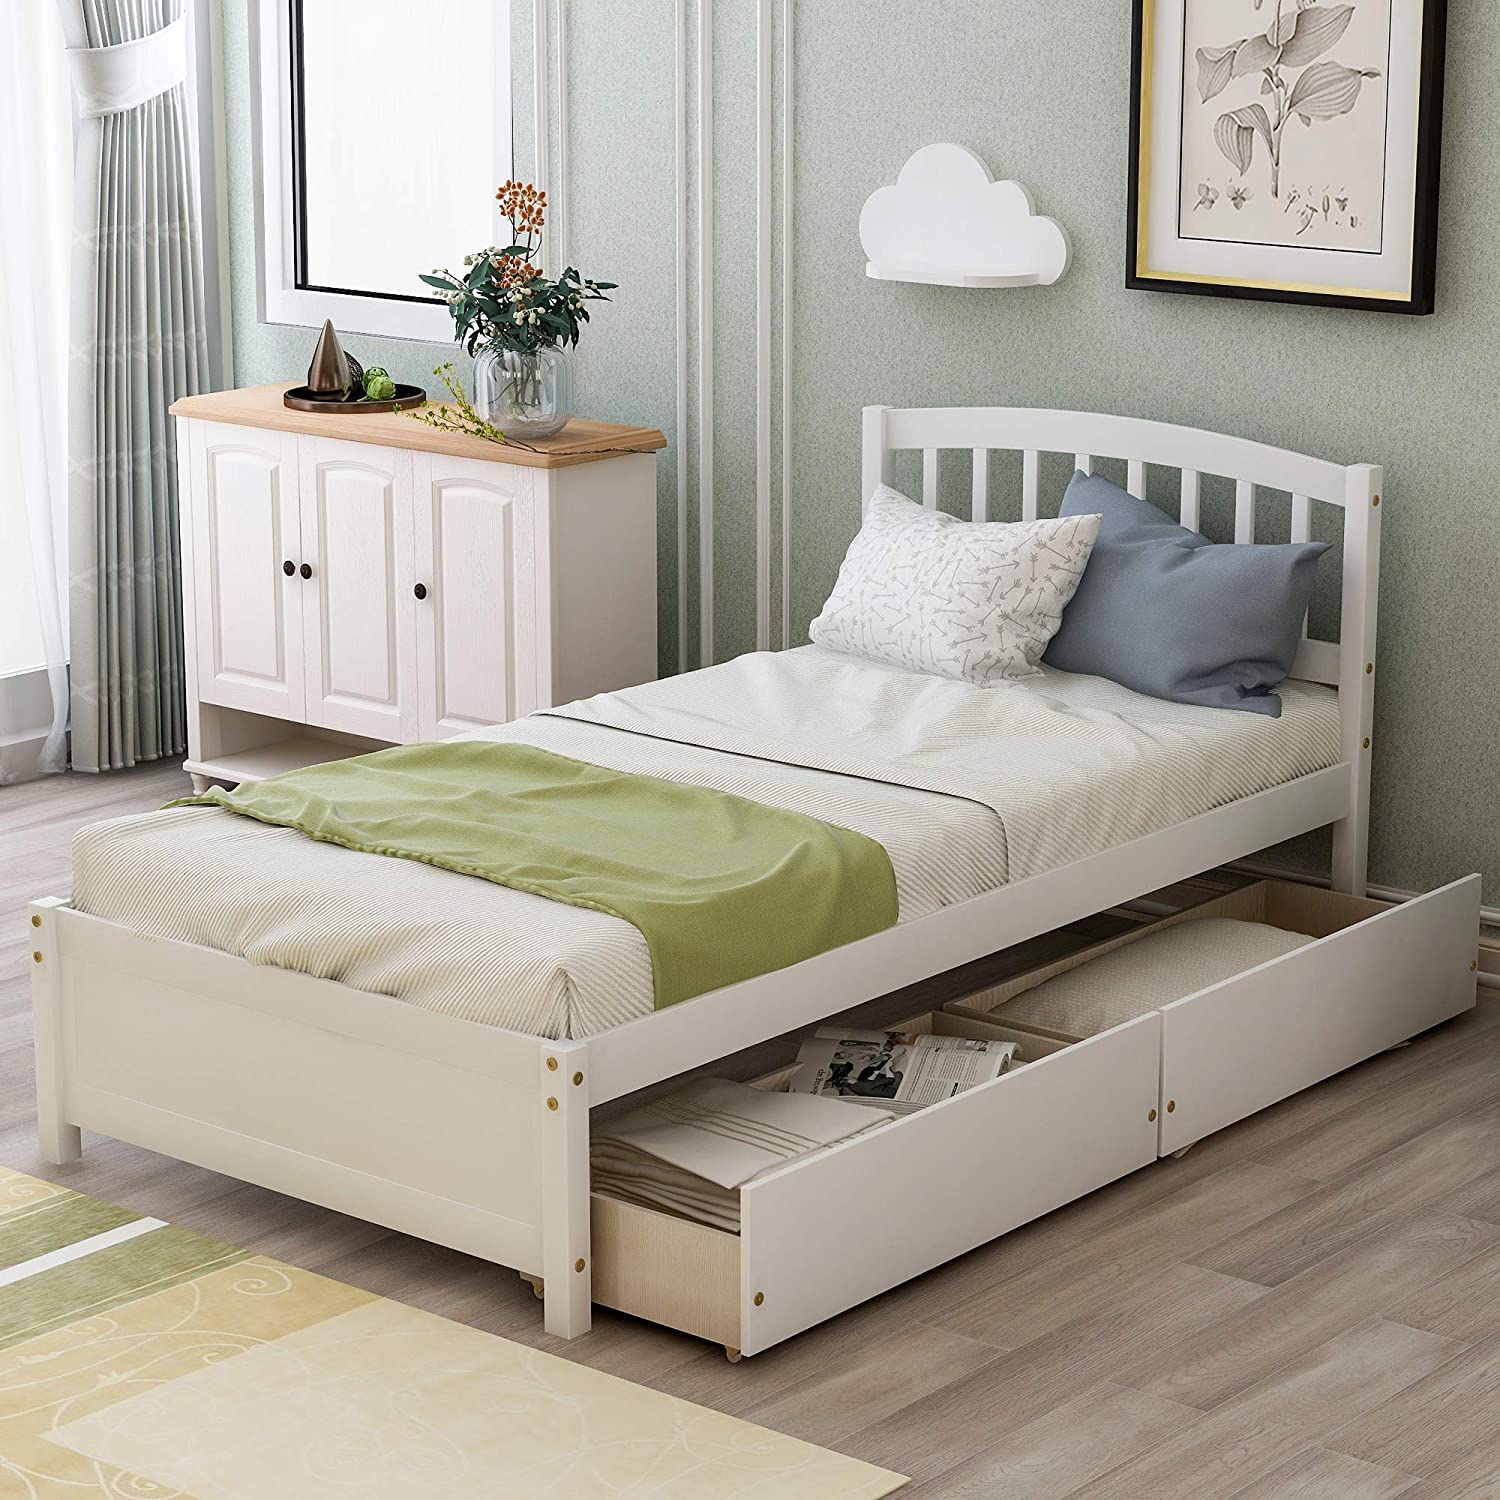 Twin Size Platform Bed with Two Storage Drawers, Wood Bed Frame with Headboard, White 79.5x41.8x37.4inch - image 2 of 7